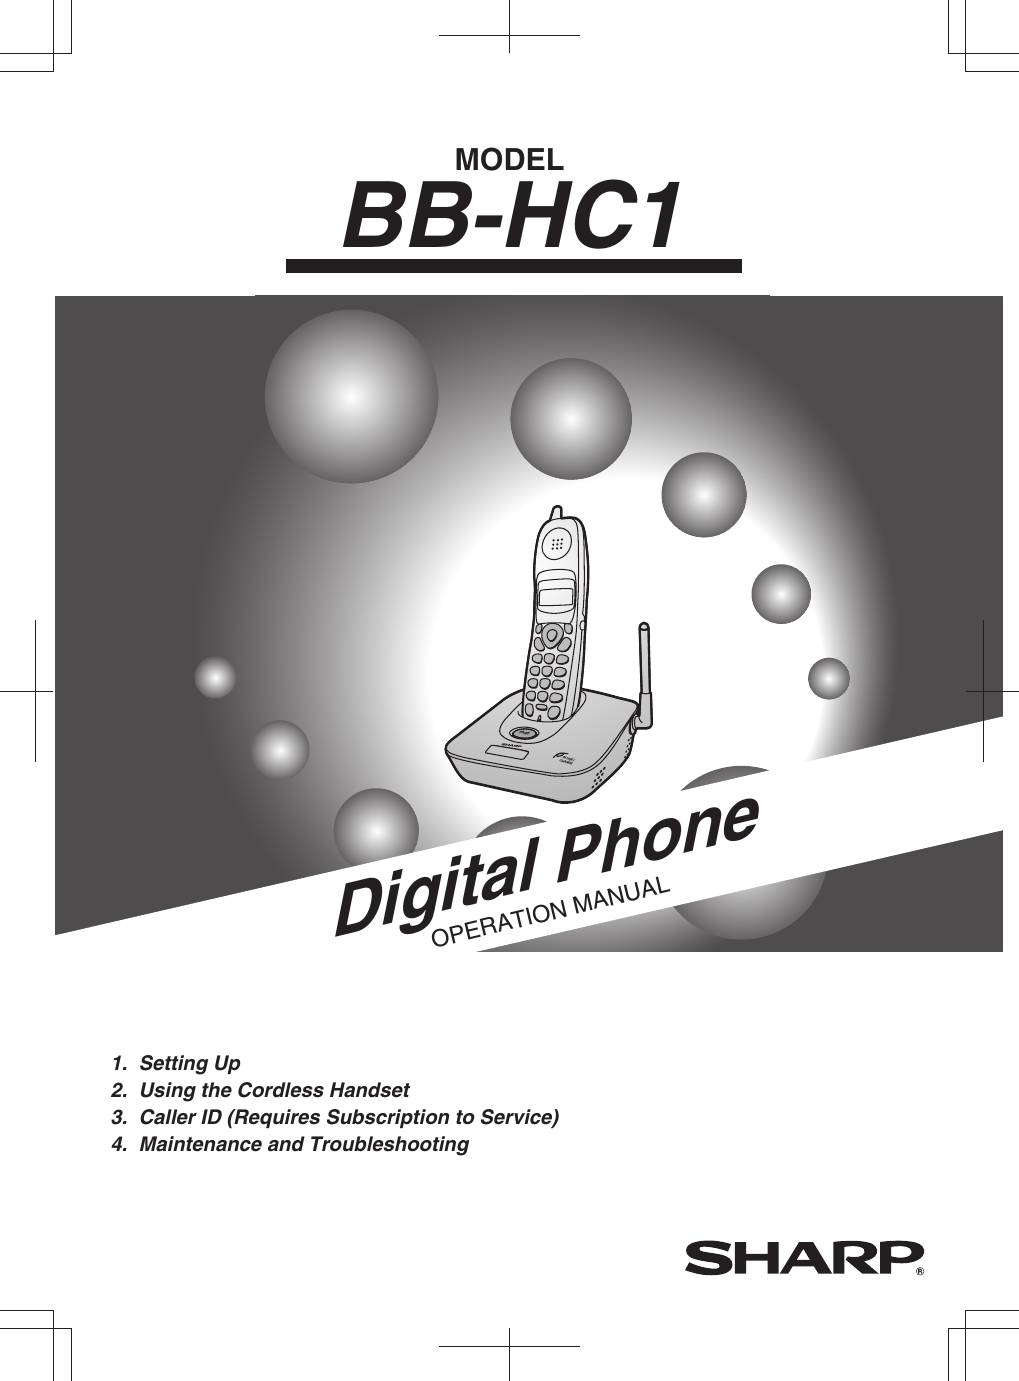 MODELBB-HC1Digital PhoneOPERATION MANUAL1.  Setting Up   2.  Using the Cordless Handset3.  Caller ID (Requires Subscription to Service)4.  Maintenance and TroubleshootingIN USE /CHARGEPAGE